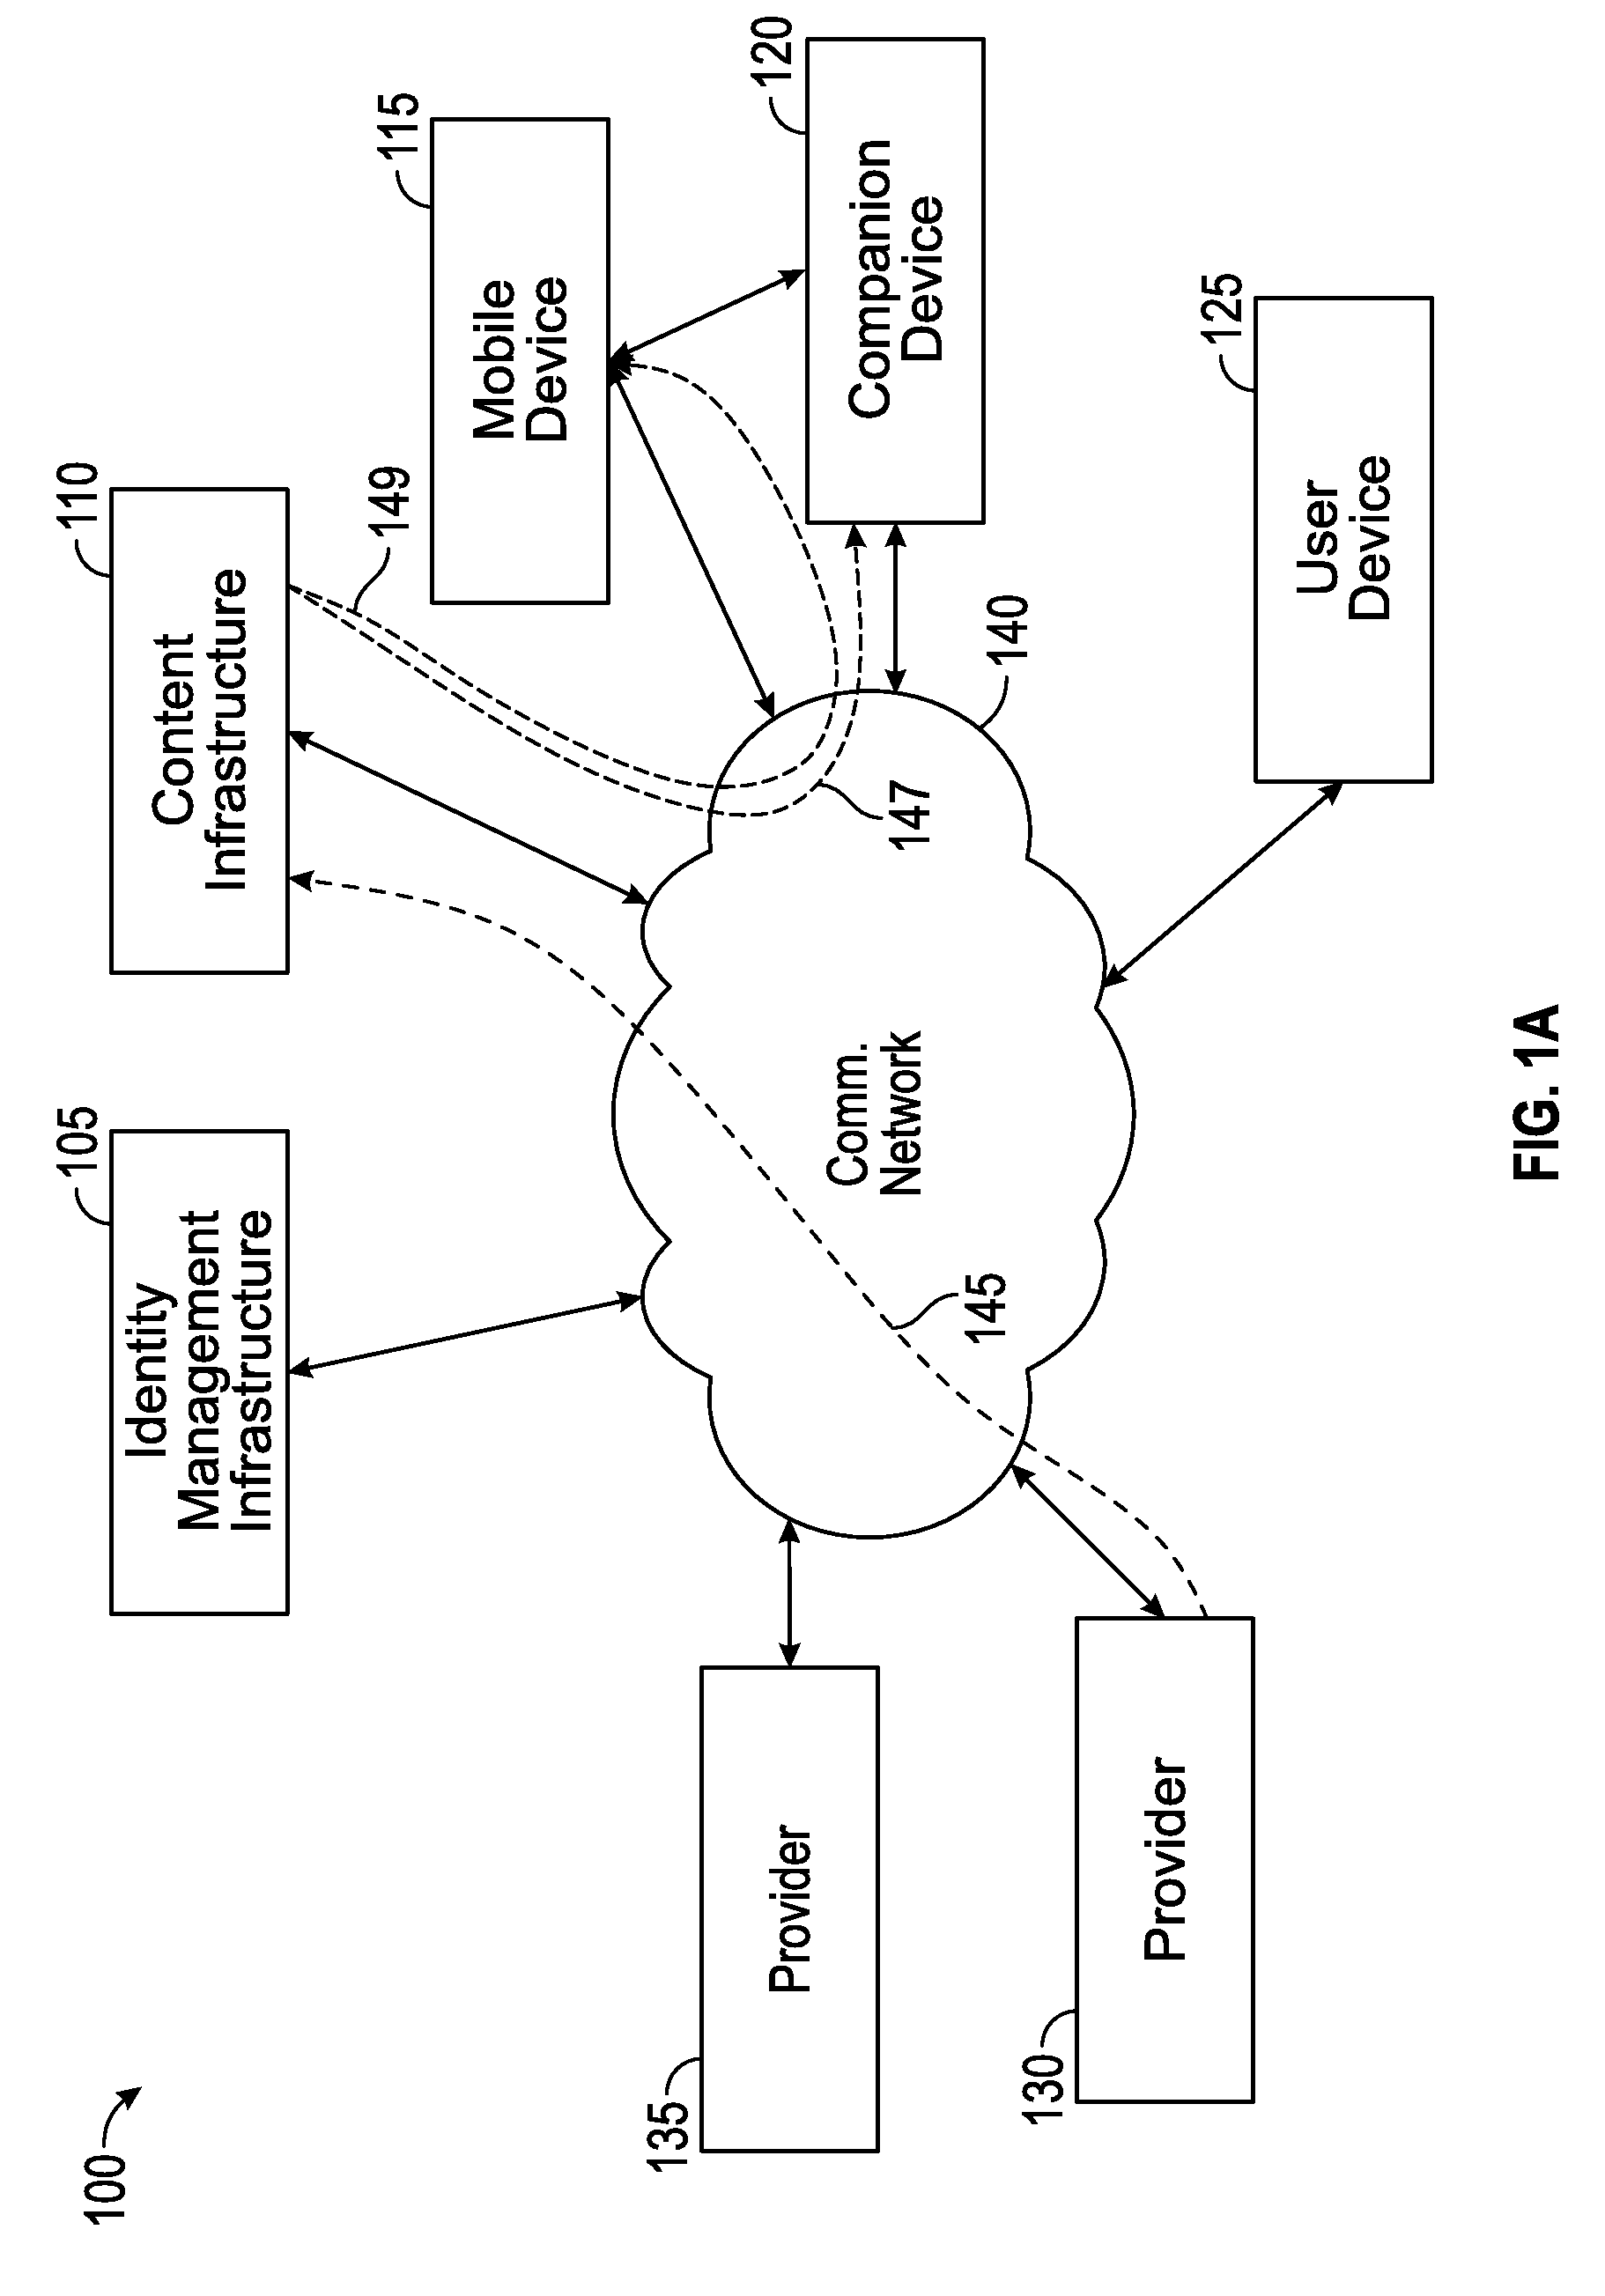 Unified message delivery between portable electronic devices